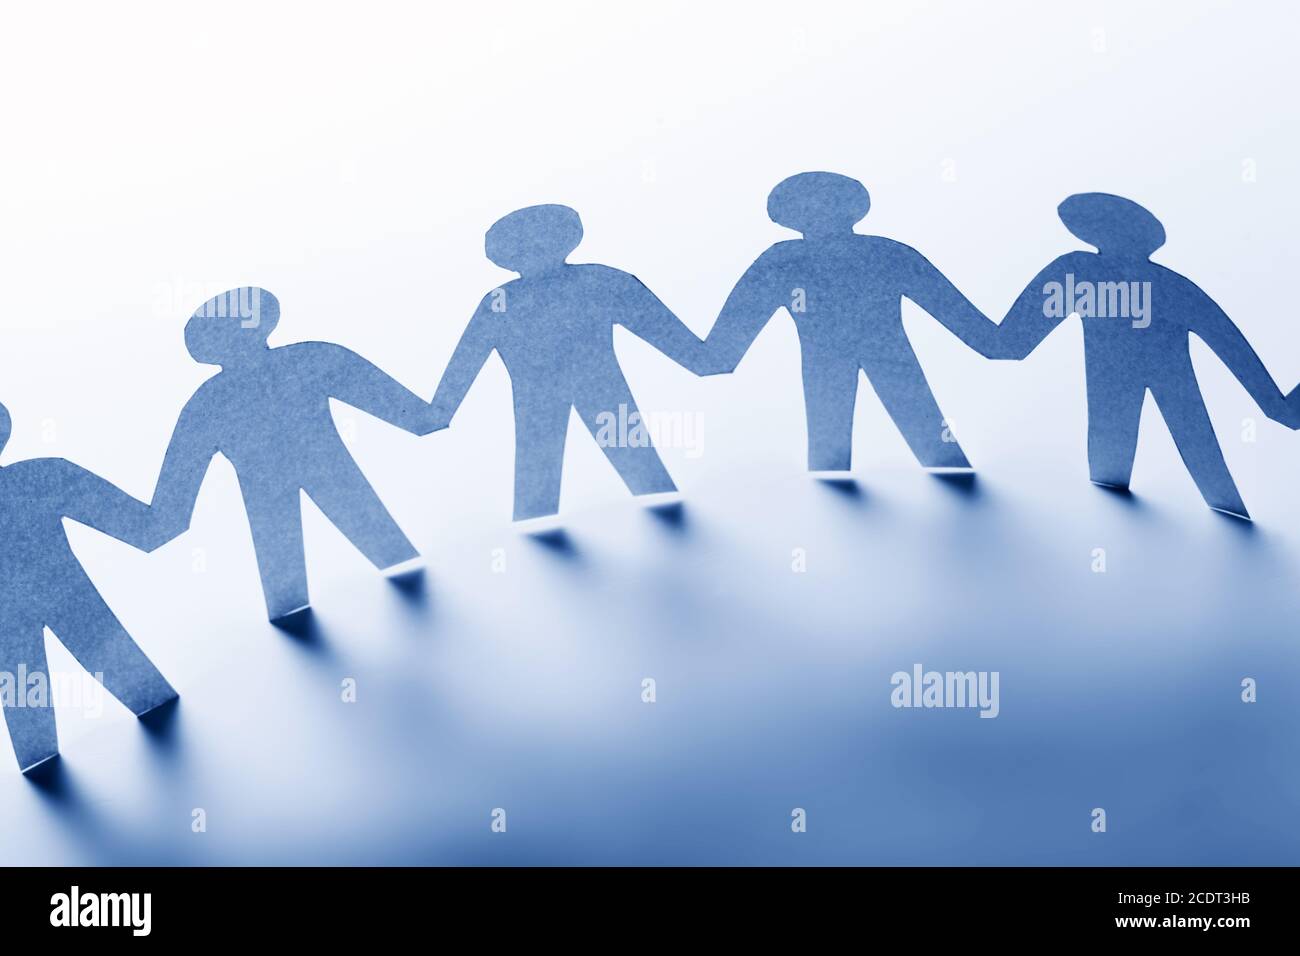 Paper people standing together hand in hand. Team, society, business concept Stock Photo